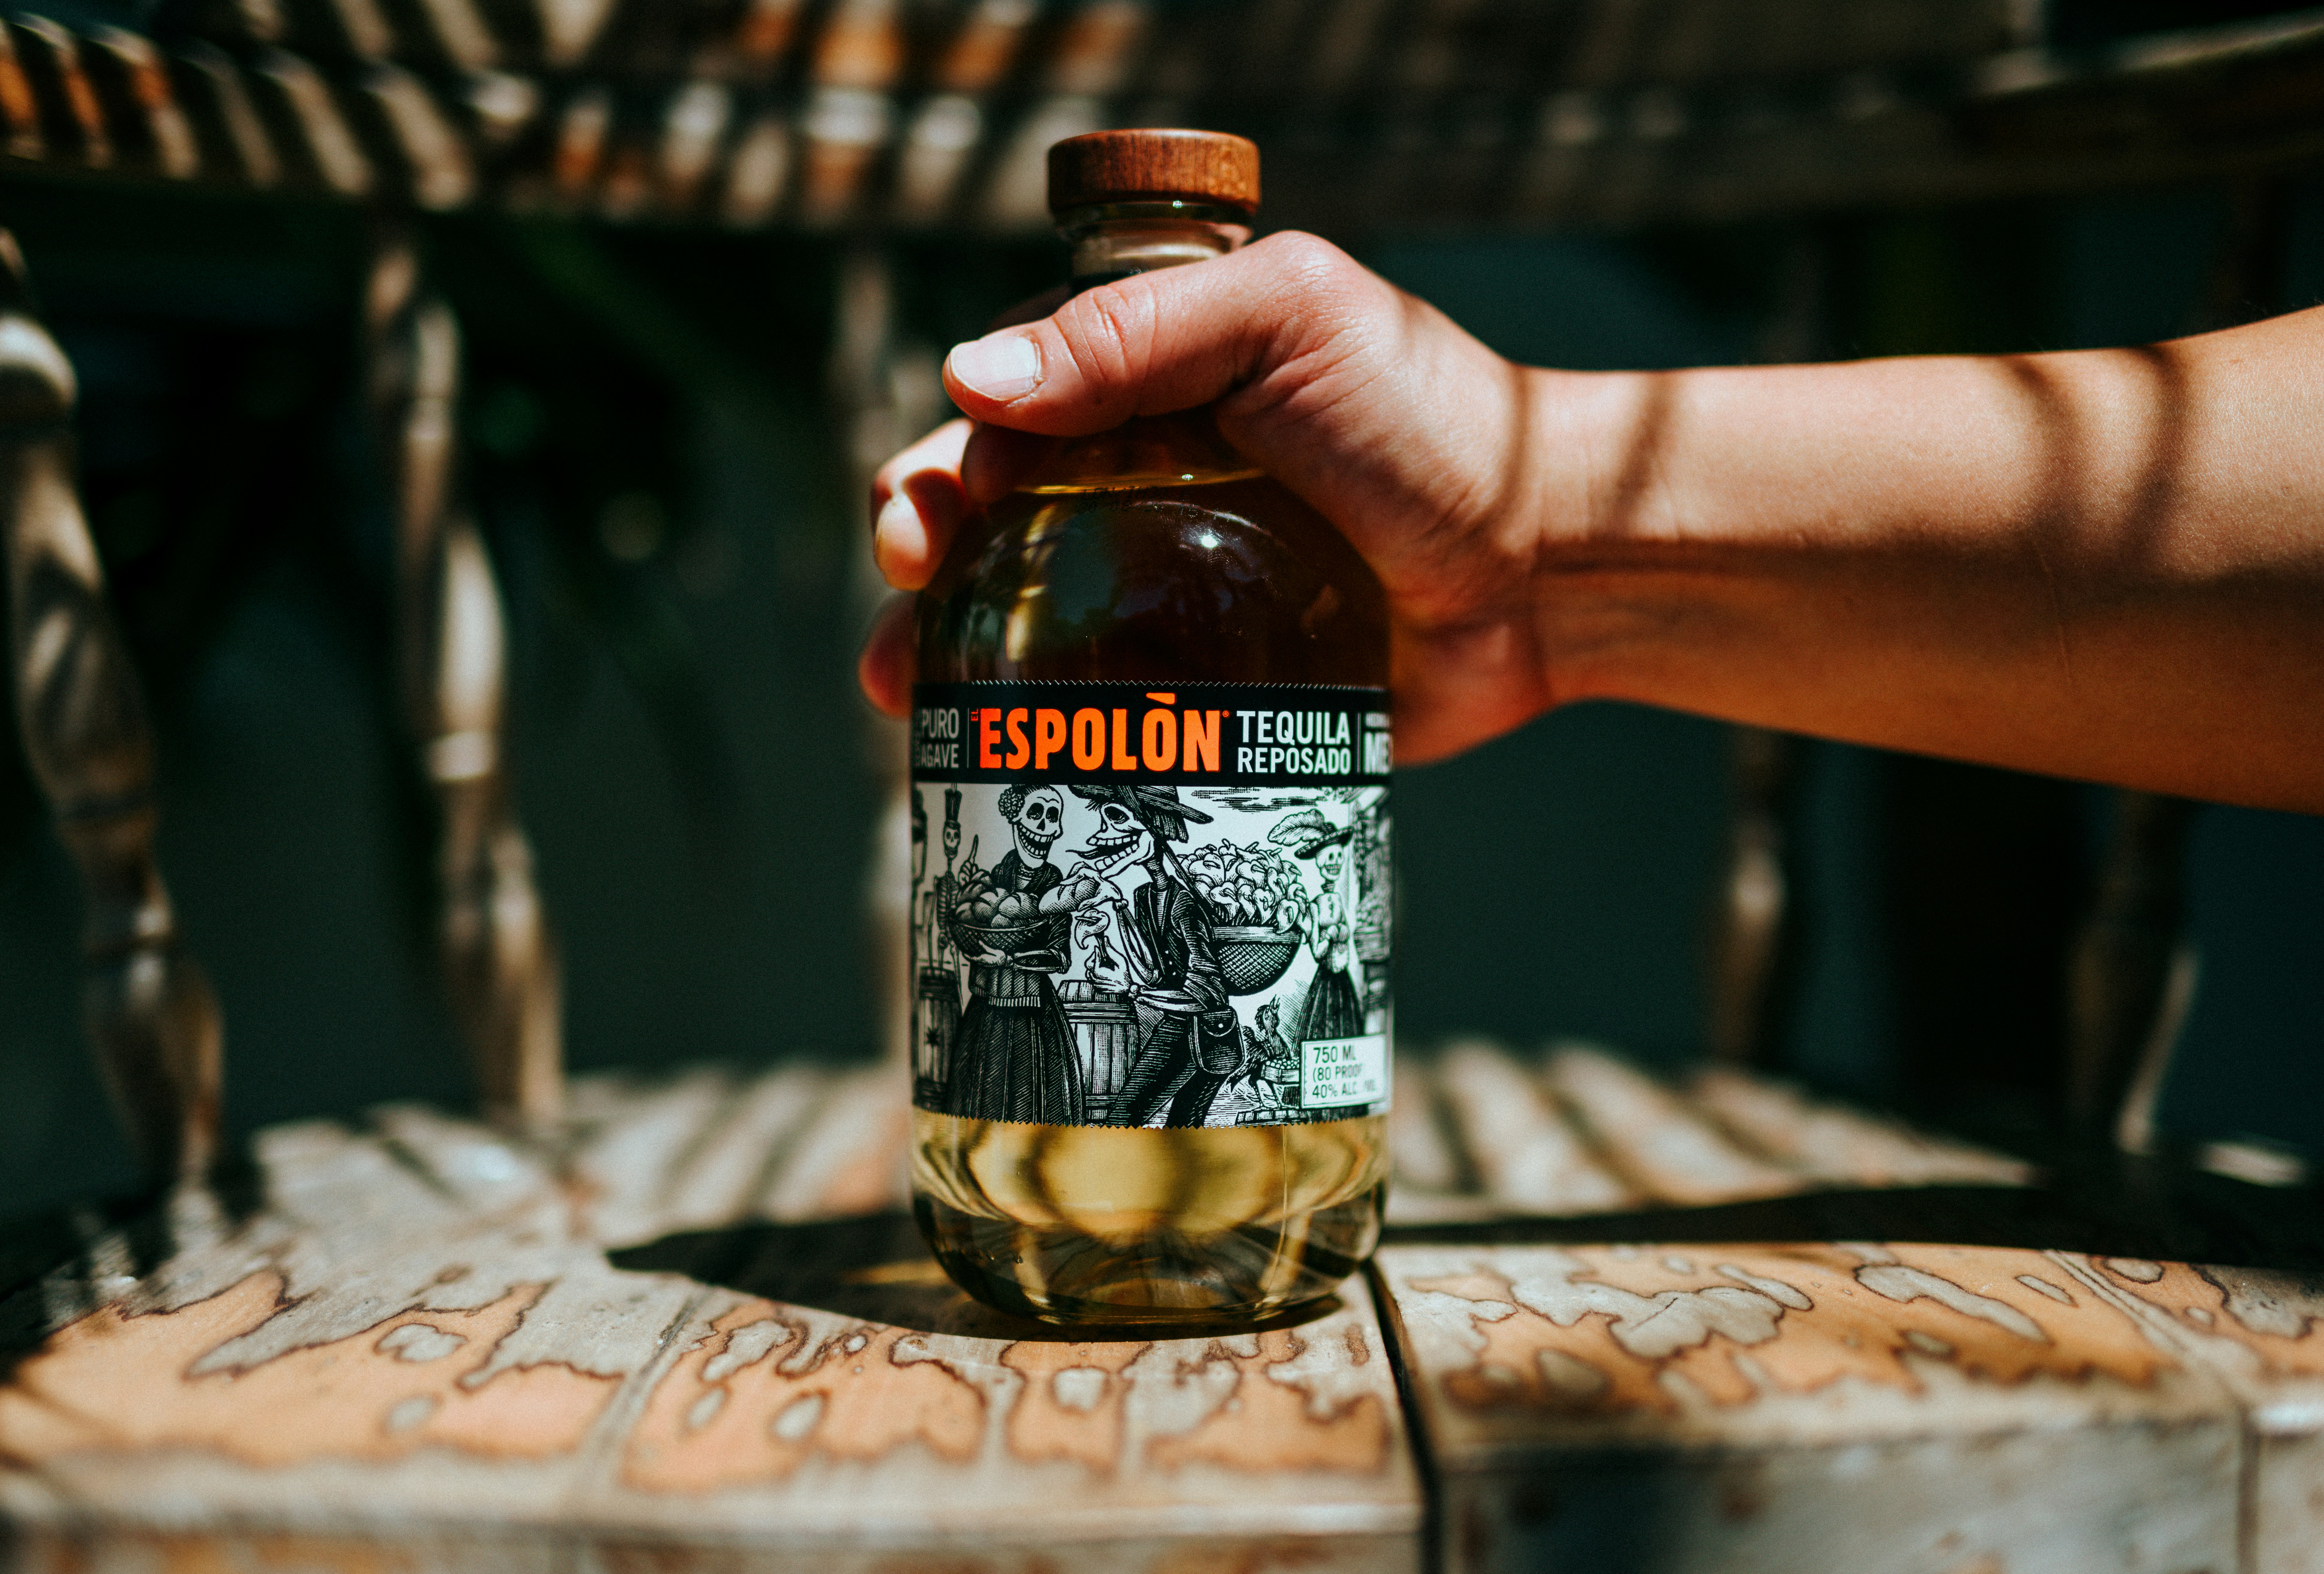 person holding Espolòn Tequila bottle